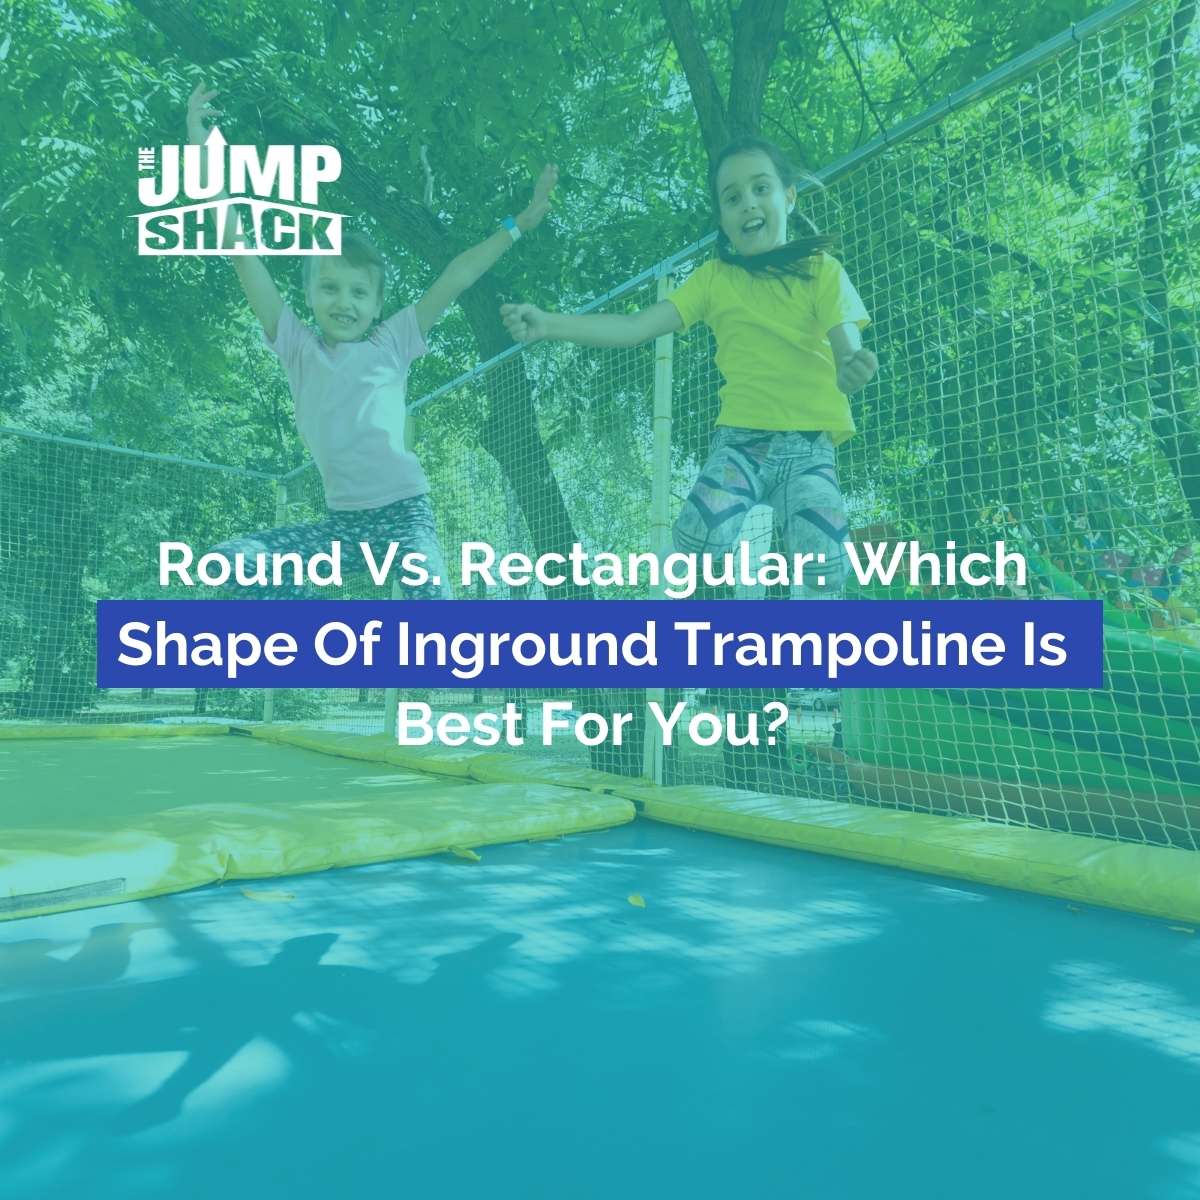 Round Vs. Rectangular Which Shape Of Inground Trampoline Is Best For You